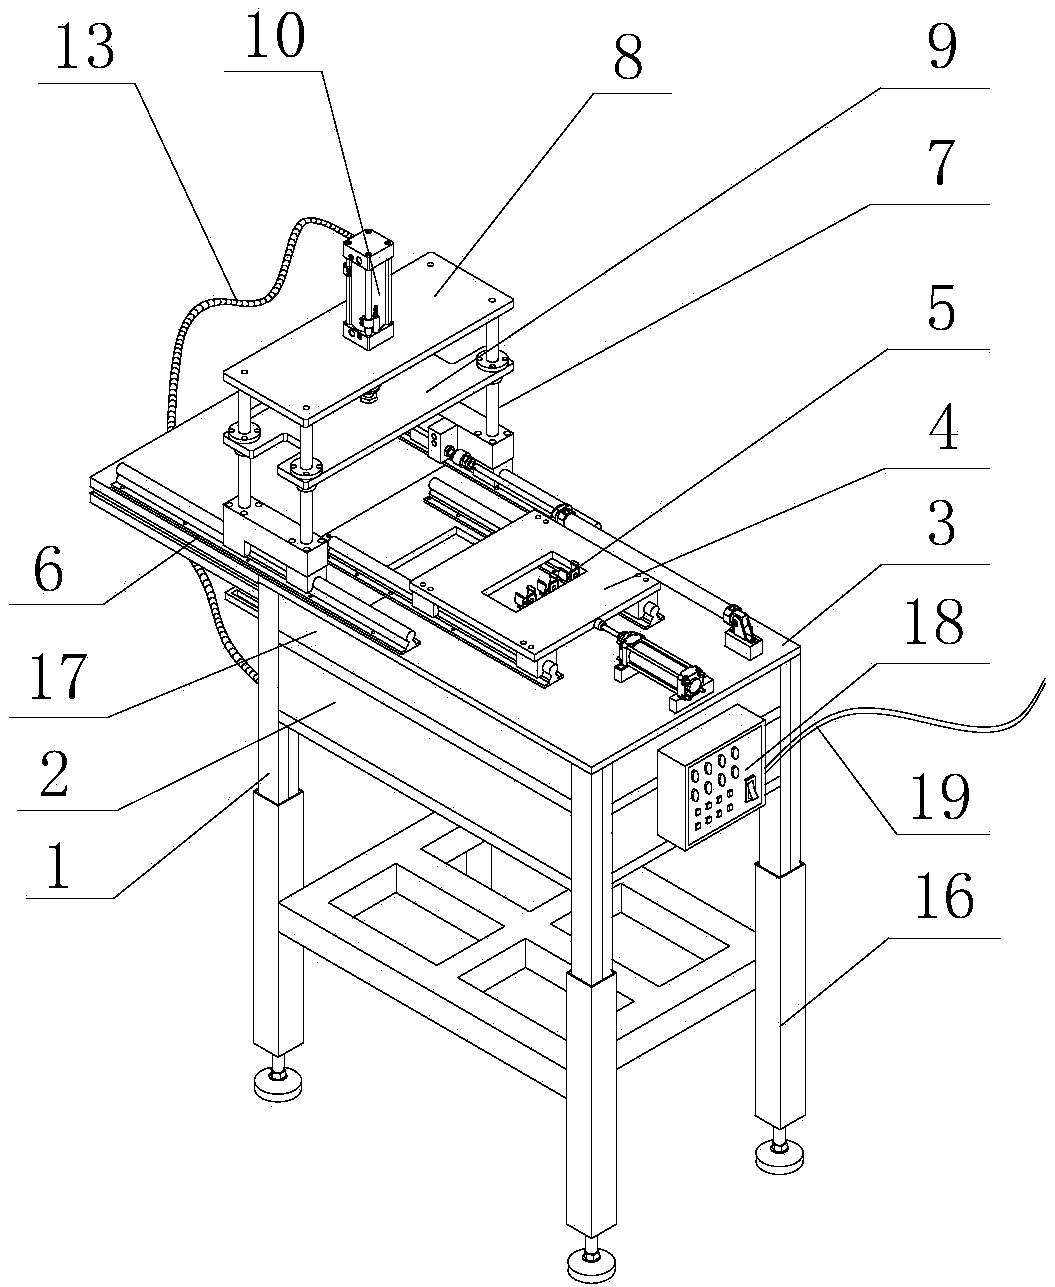 Ginseng slicing device with high safety